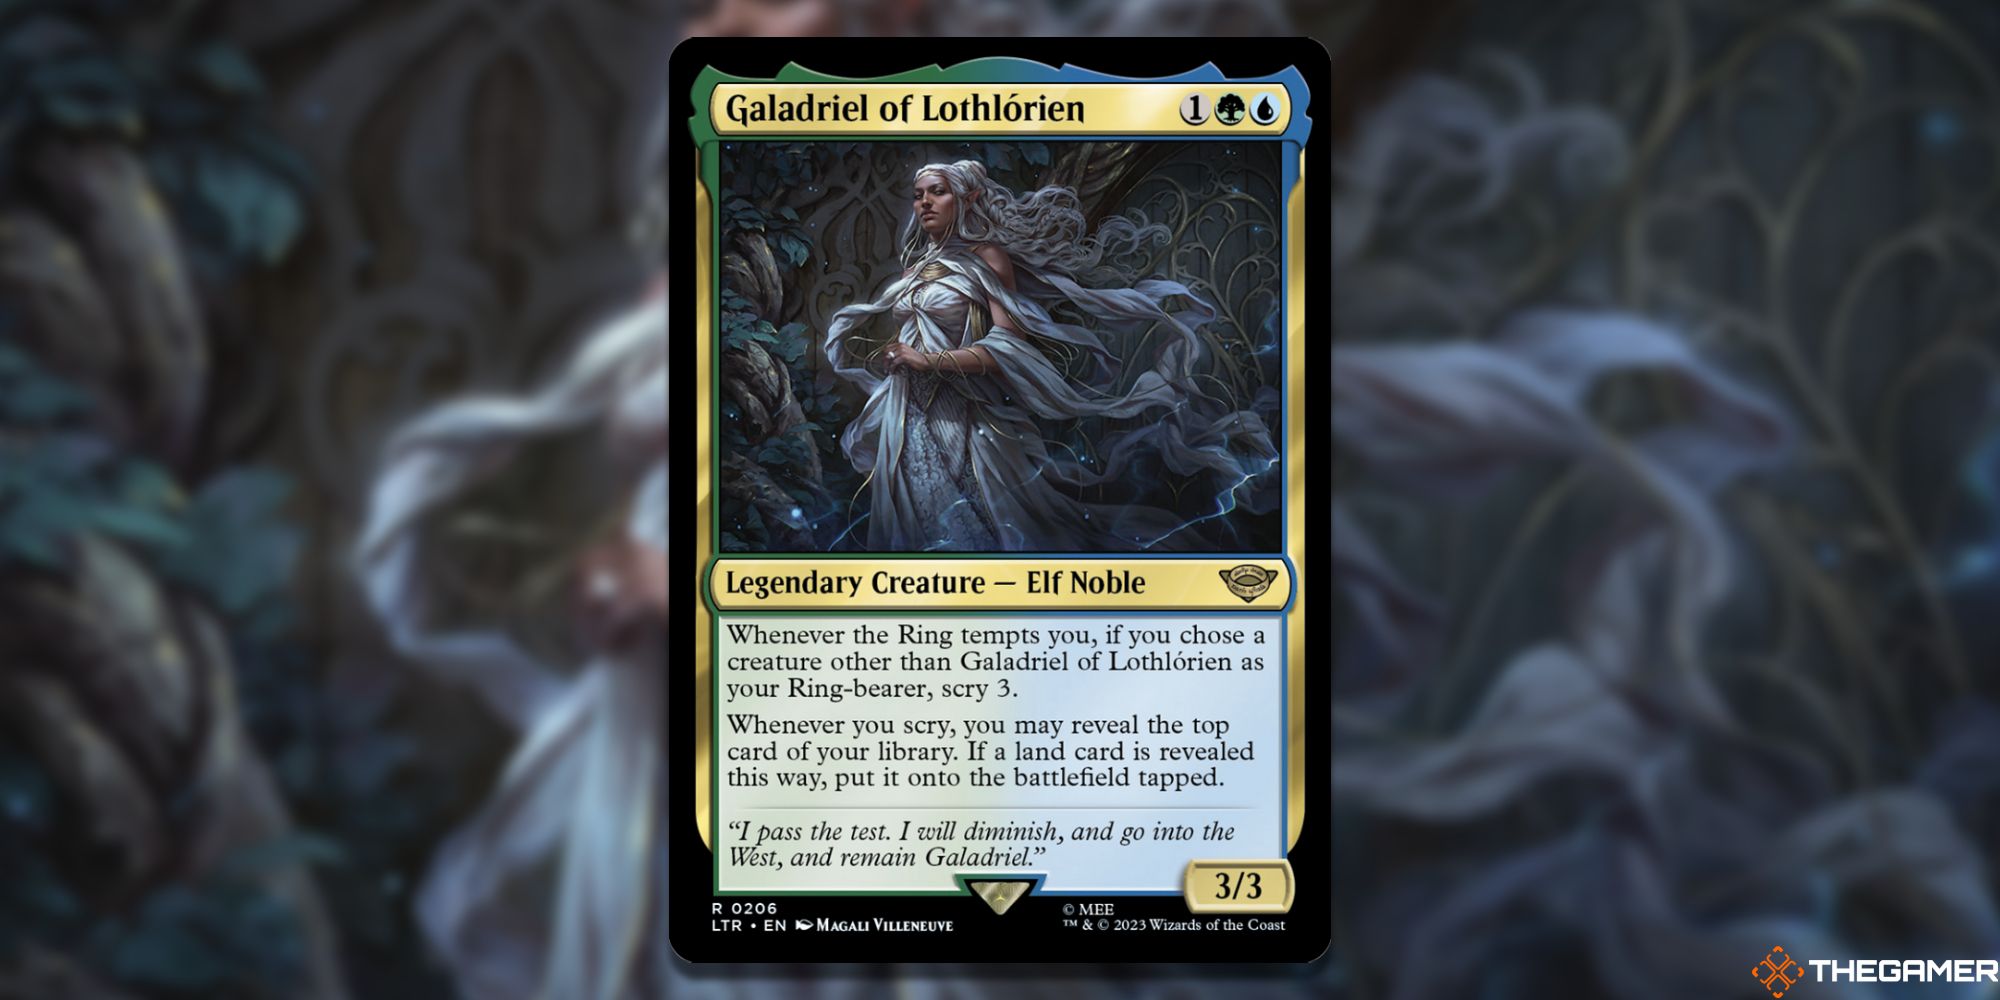 Image of the Galadriel of Lothlorien card in Magic: The Gathering, with art by Magali Villenuve